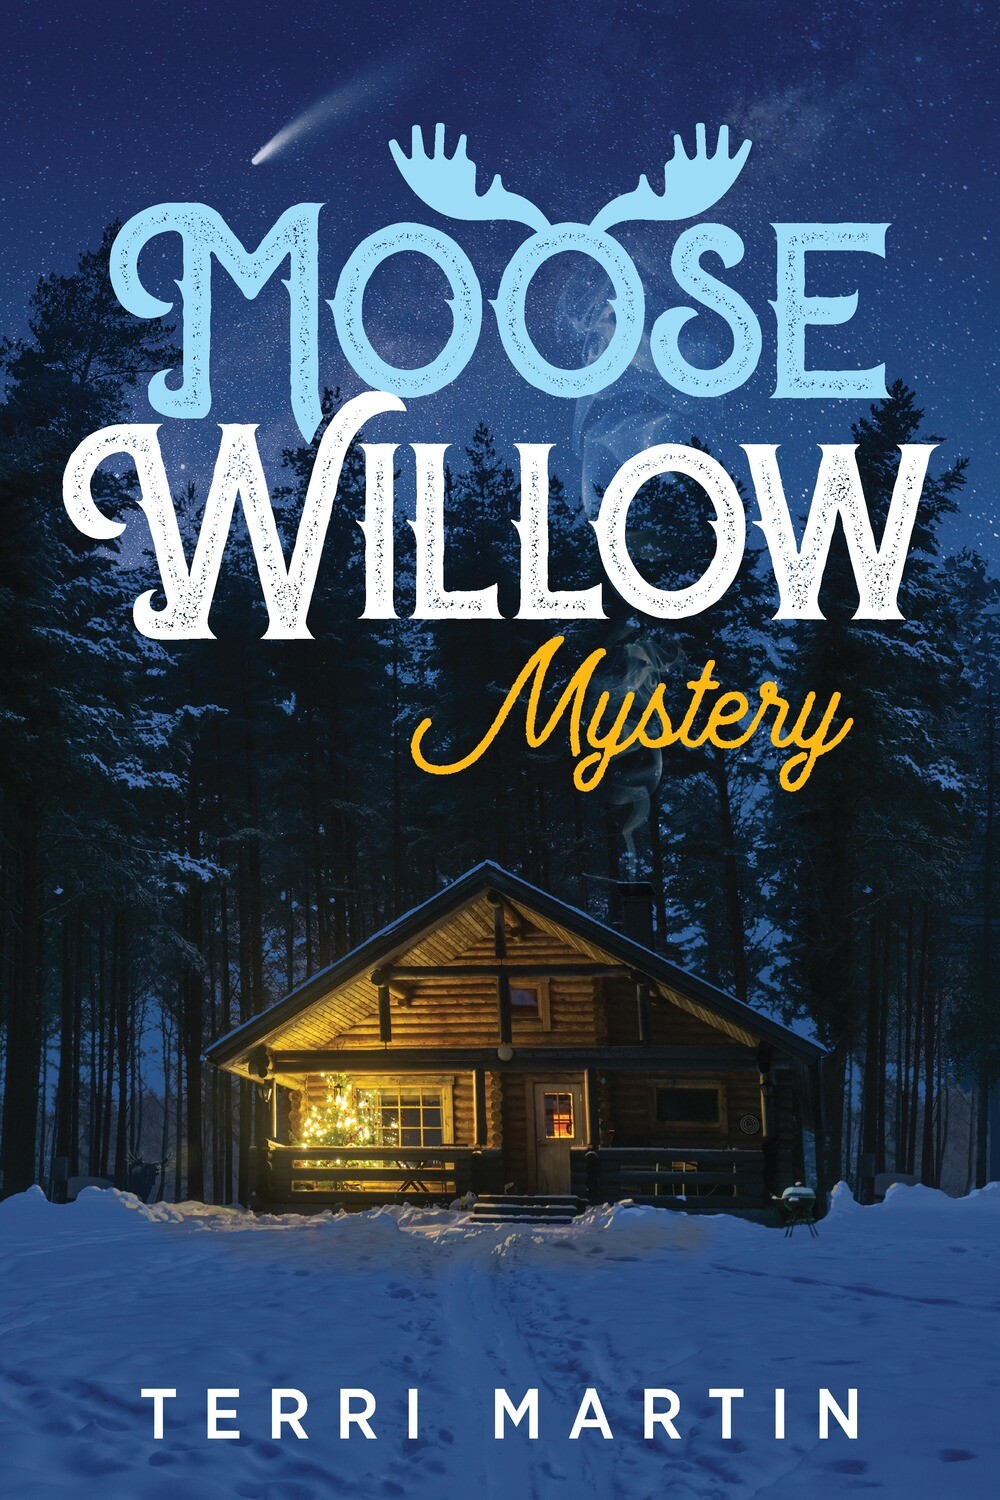 Moose Willow Mystery